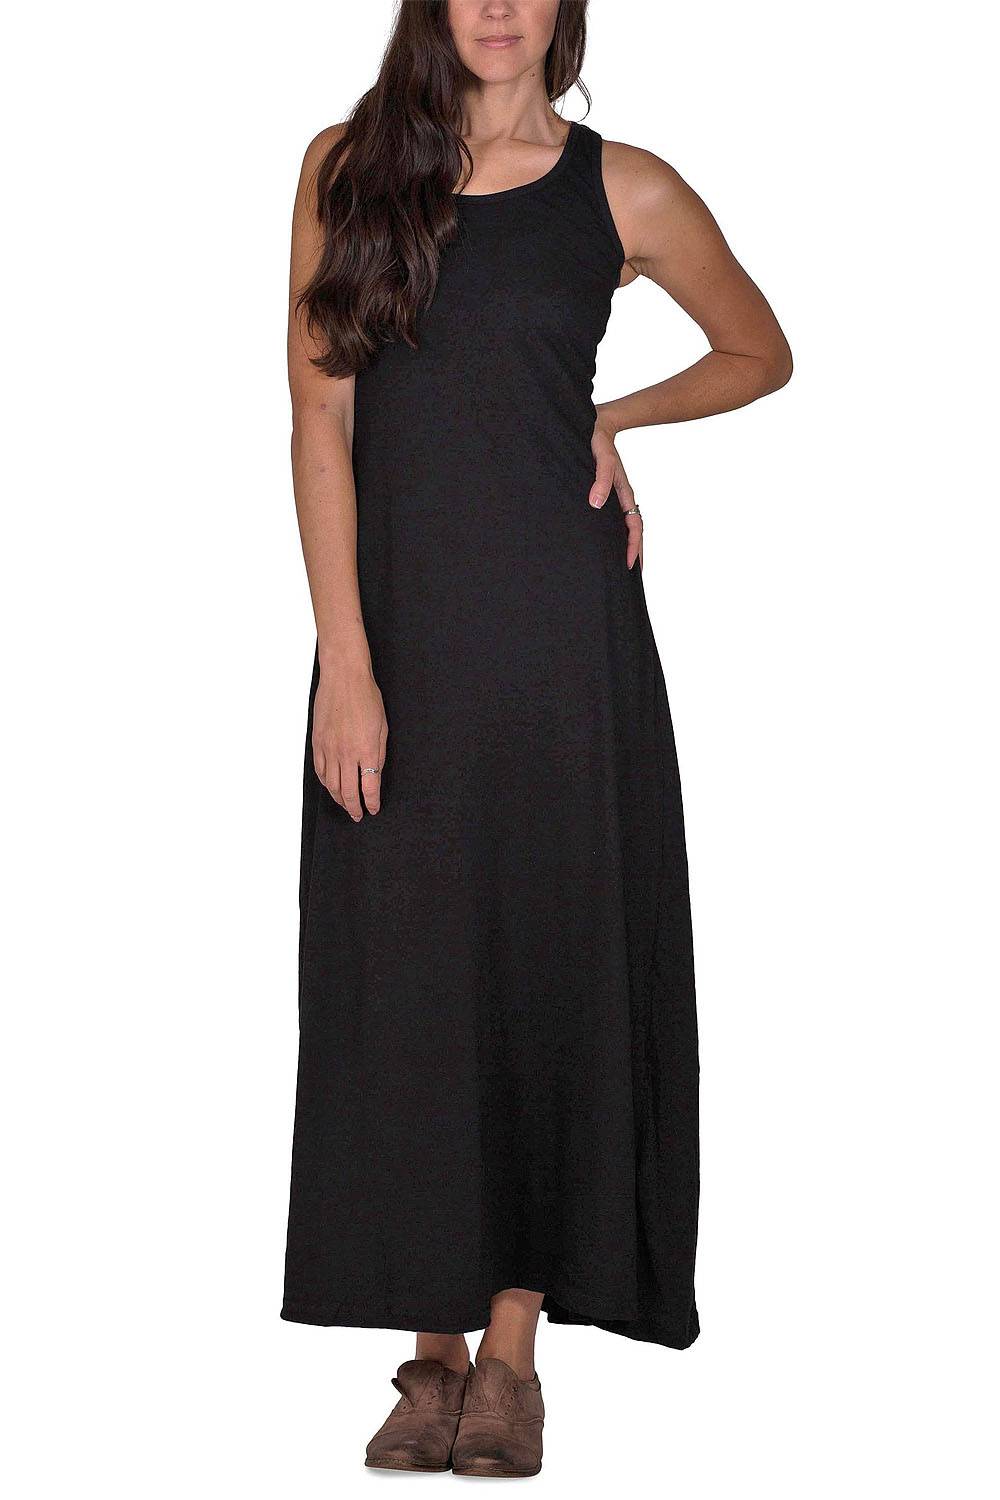 15 Best Affordable Maxi Dresses Made In The USA | Panaprium